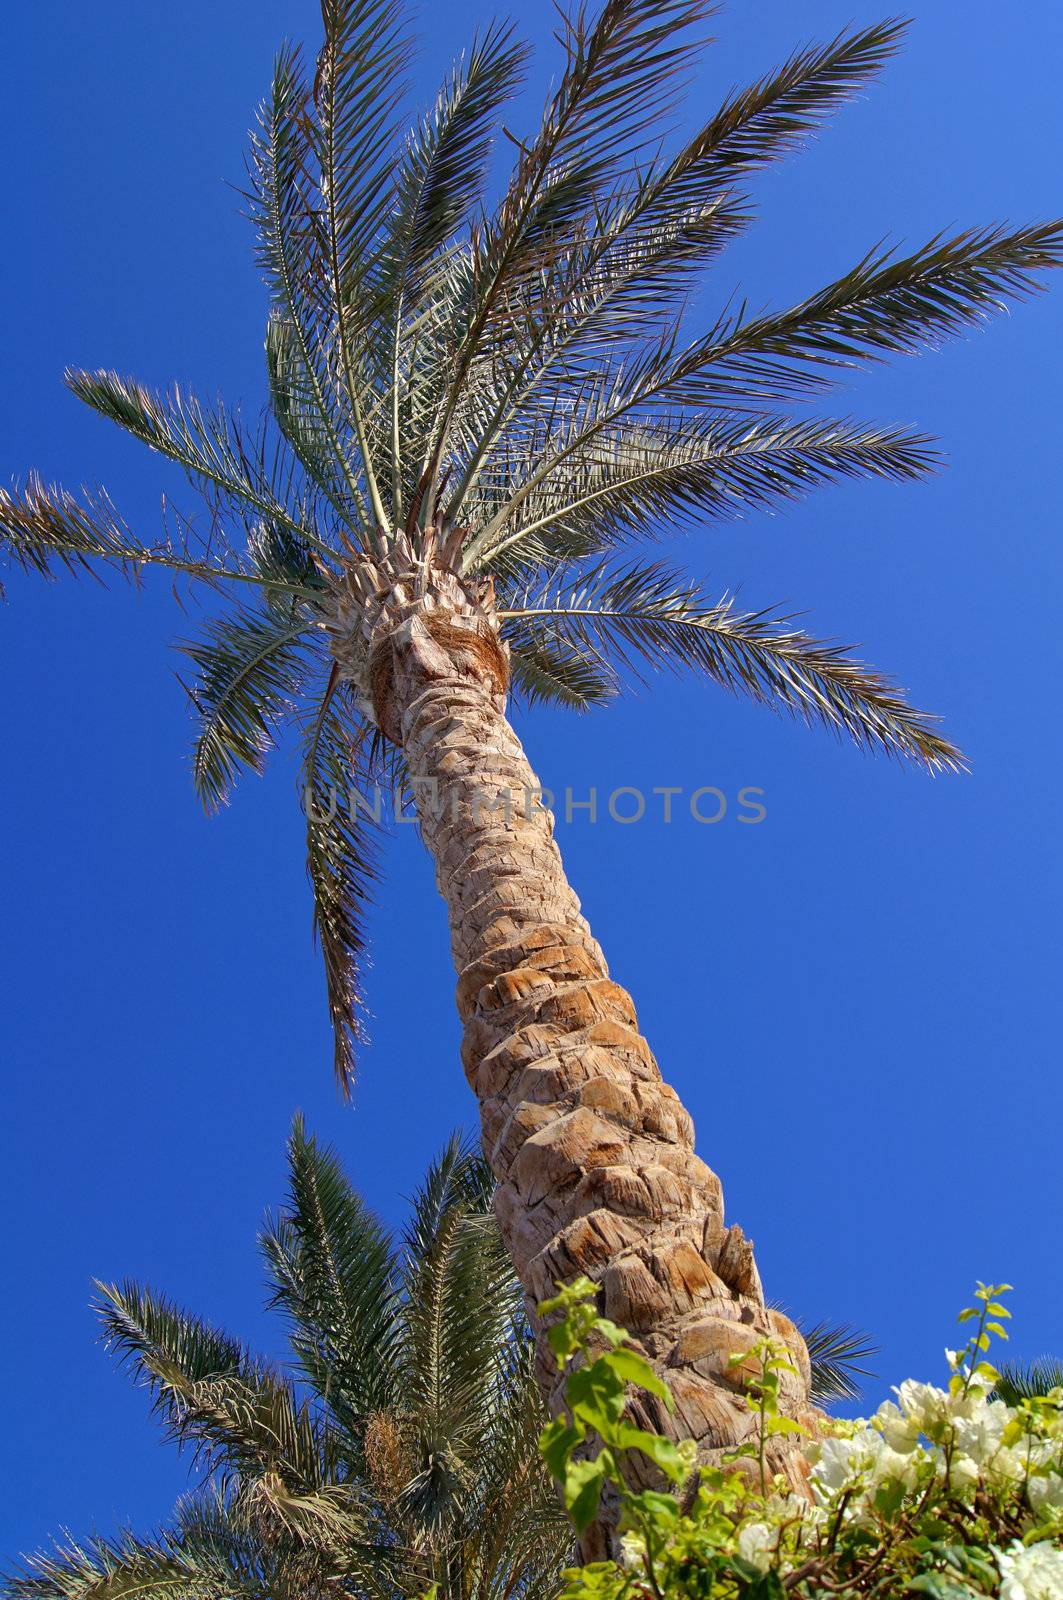 Palm and sky by Elet